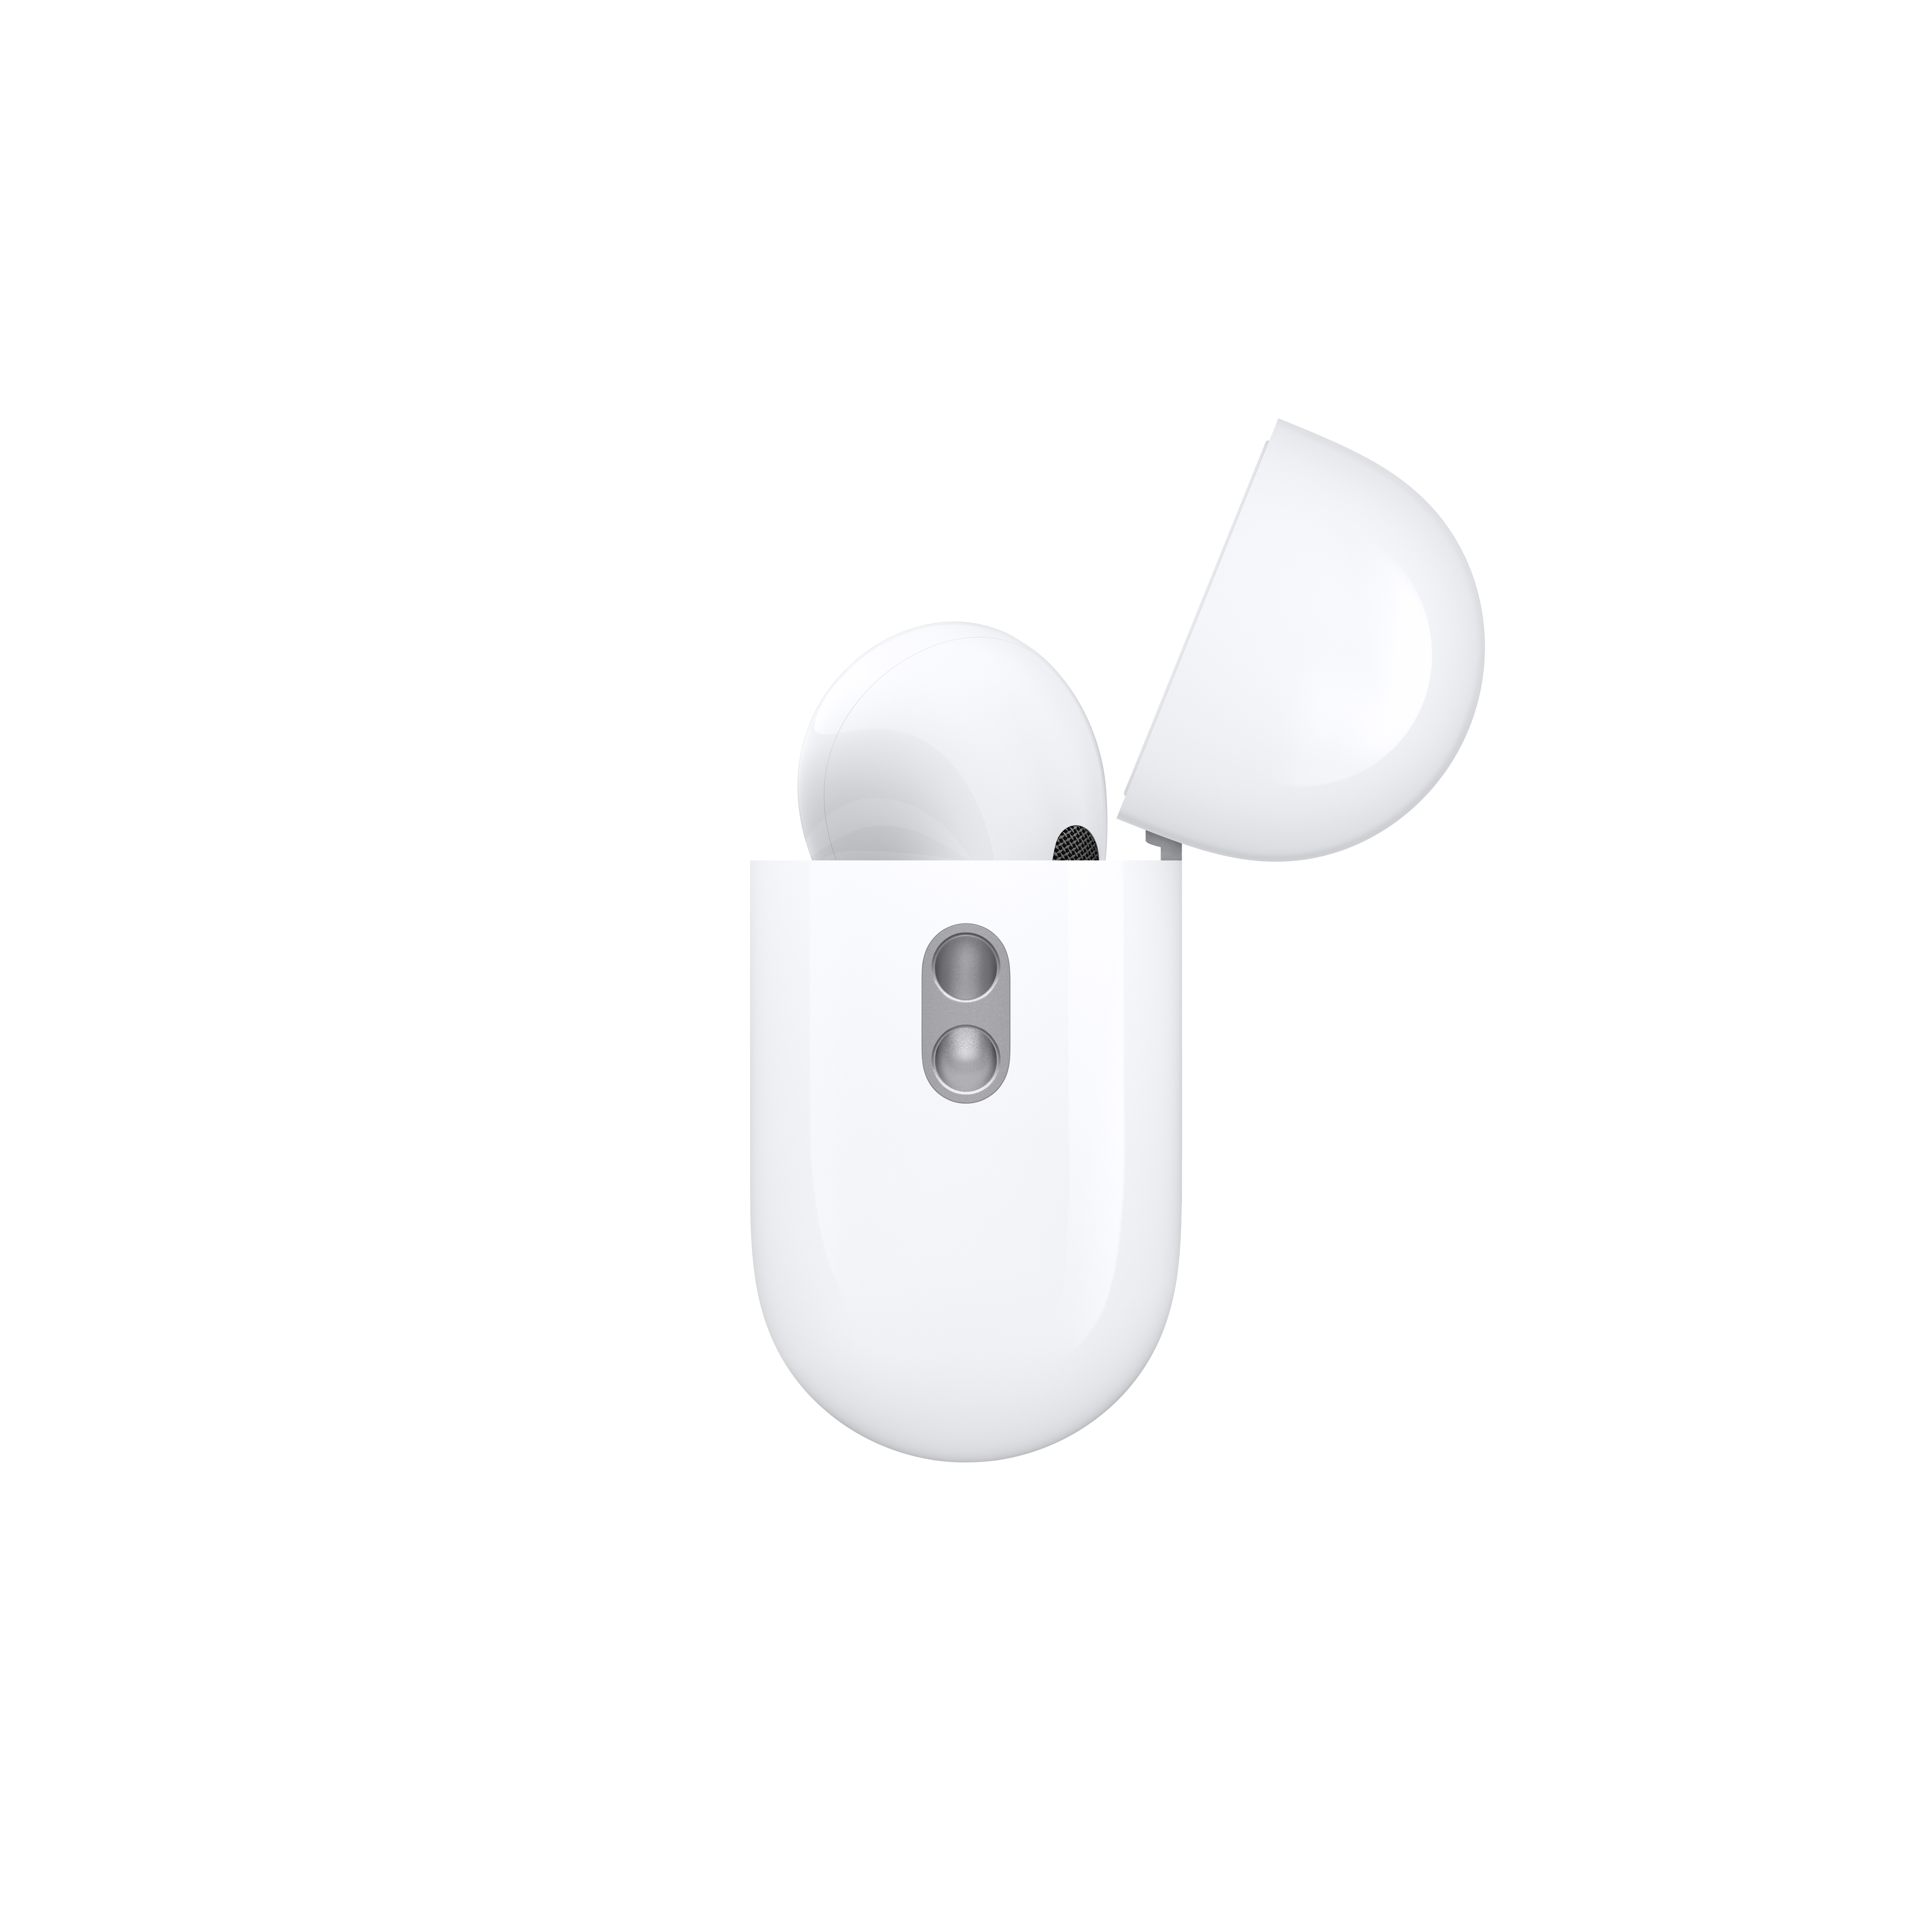 Buy AirPods Pro (第2 代) 配備MagSafe 充電盒(USB‑C) for HKD 1699.00 